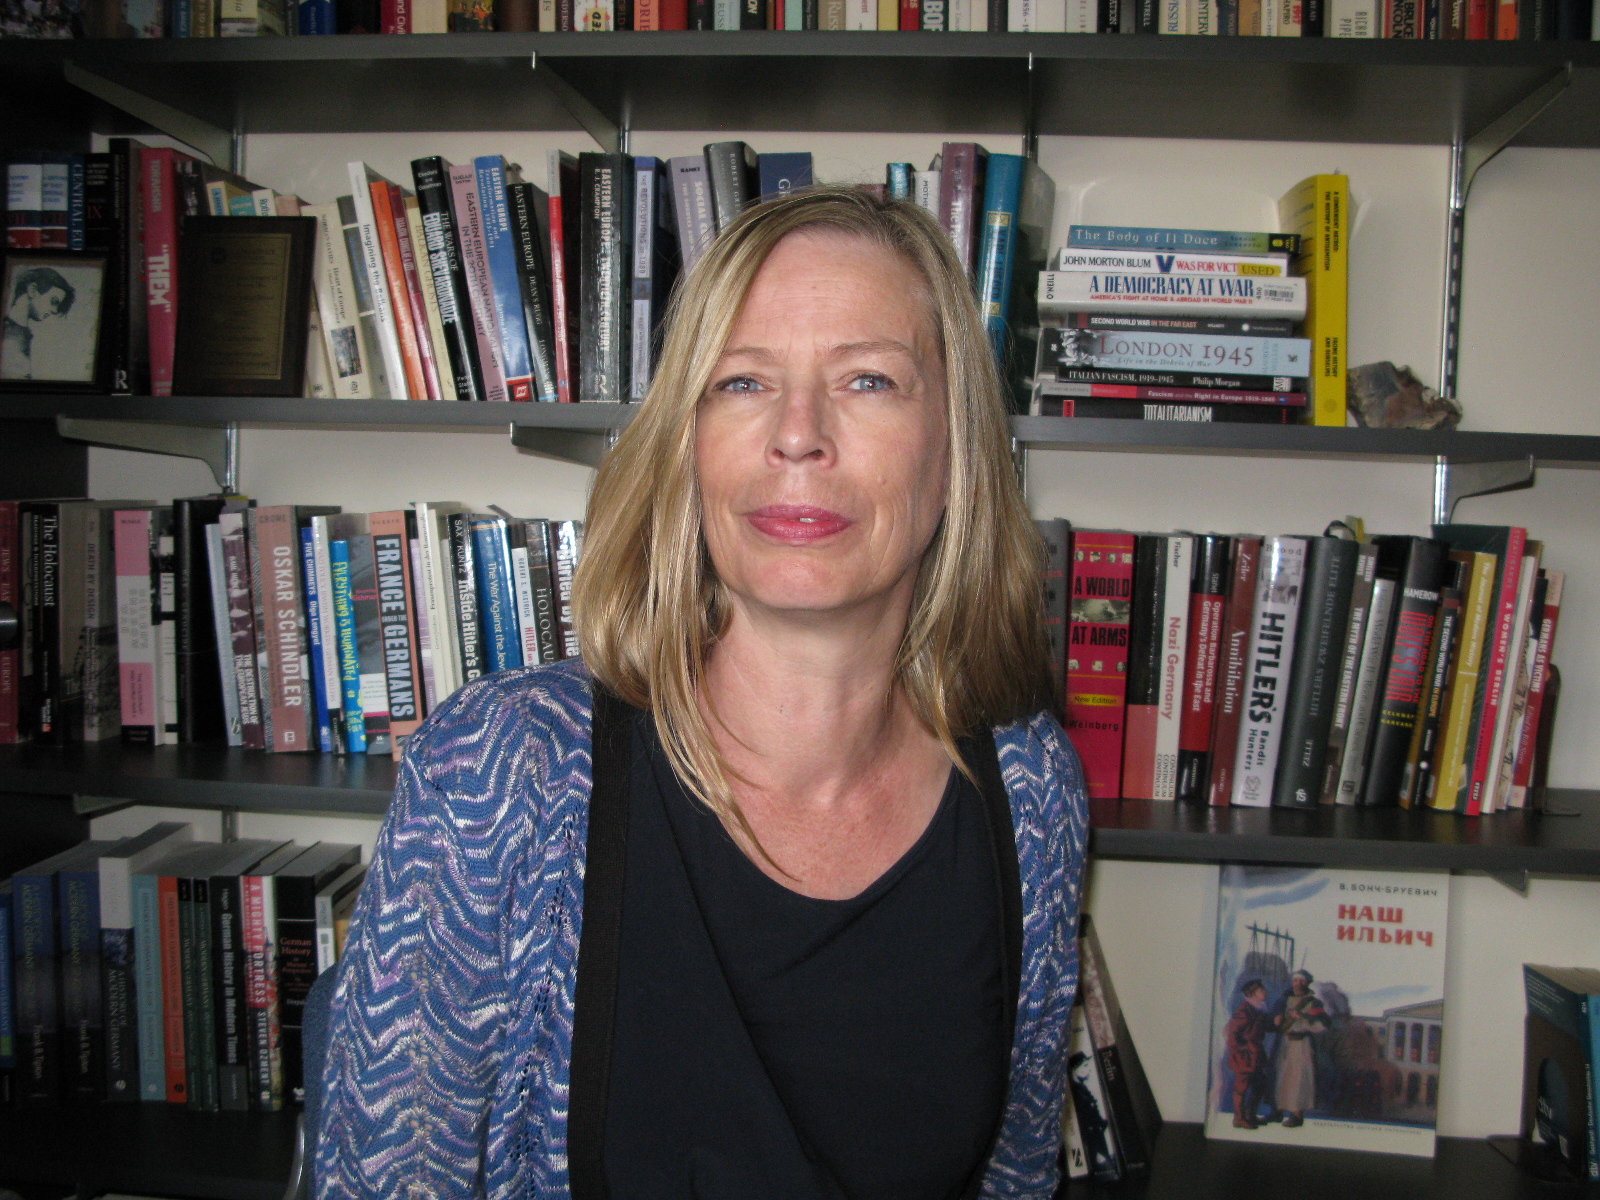 Katrin Paehler in her office, surrounded by books